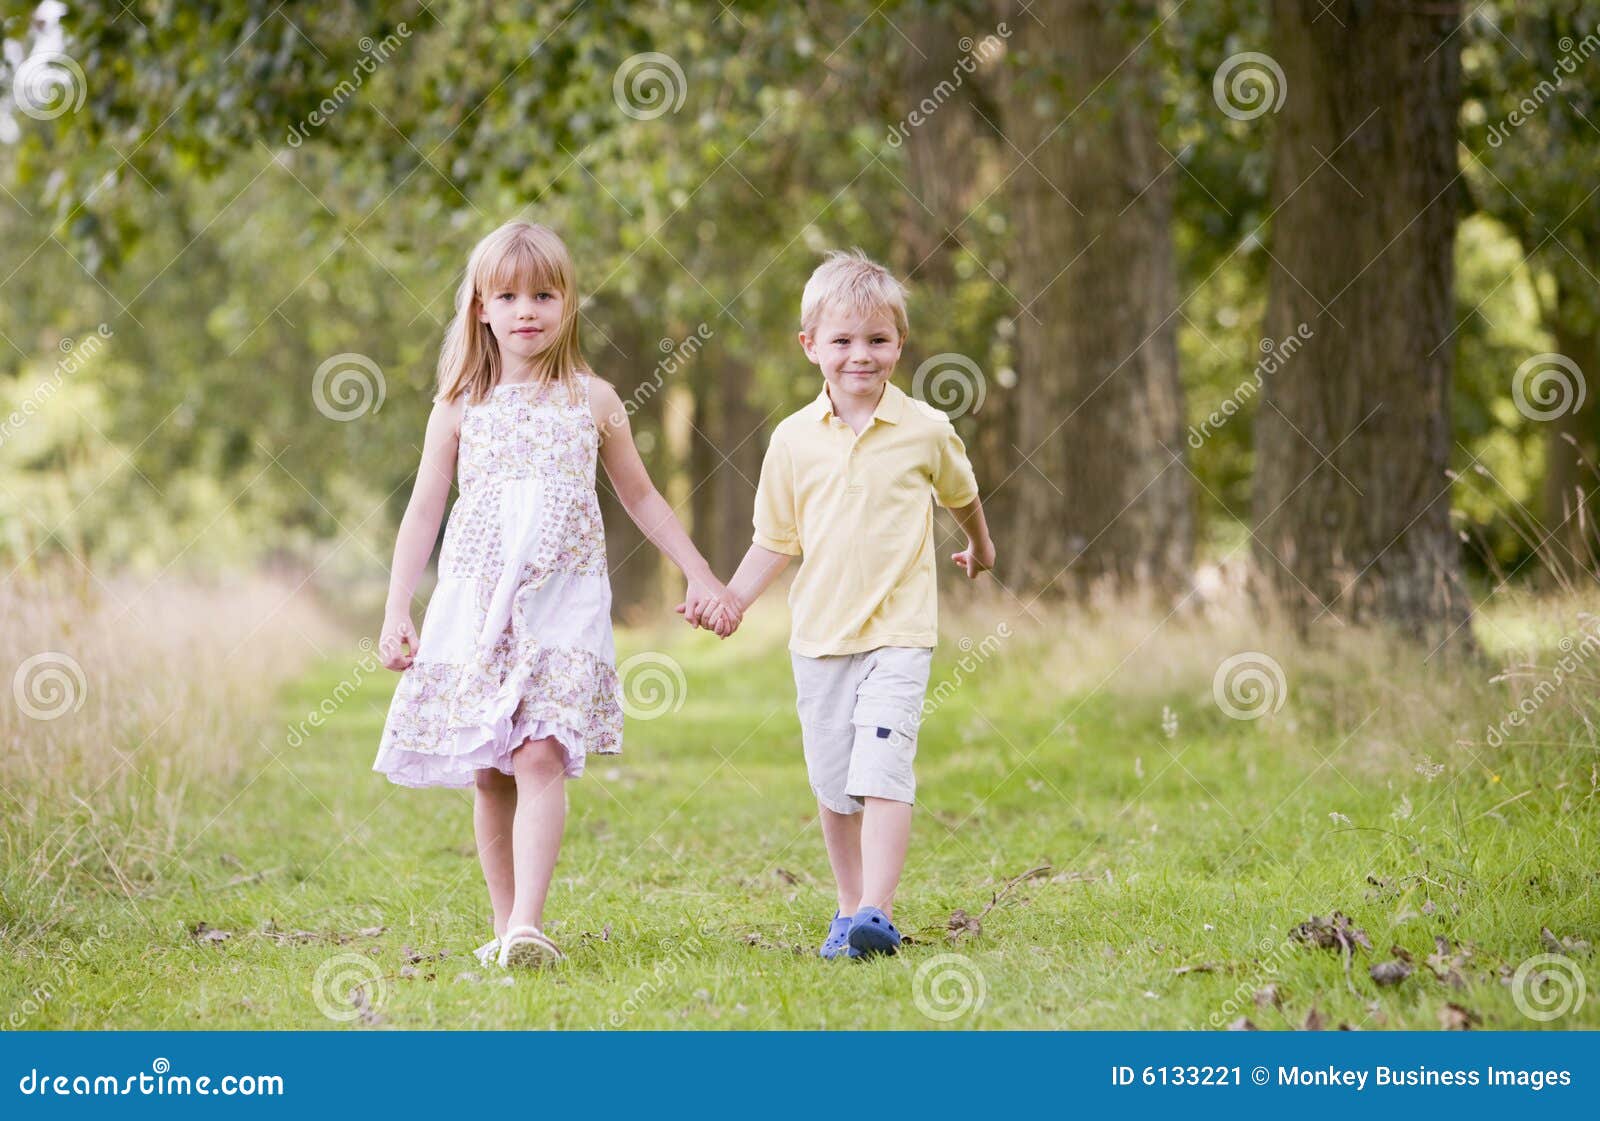 Two Young Children Walking On Path Holding Hands Stock Image Image